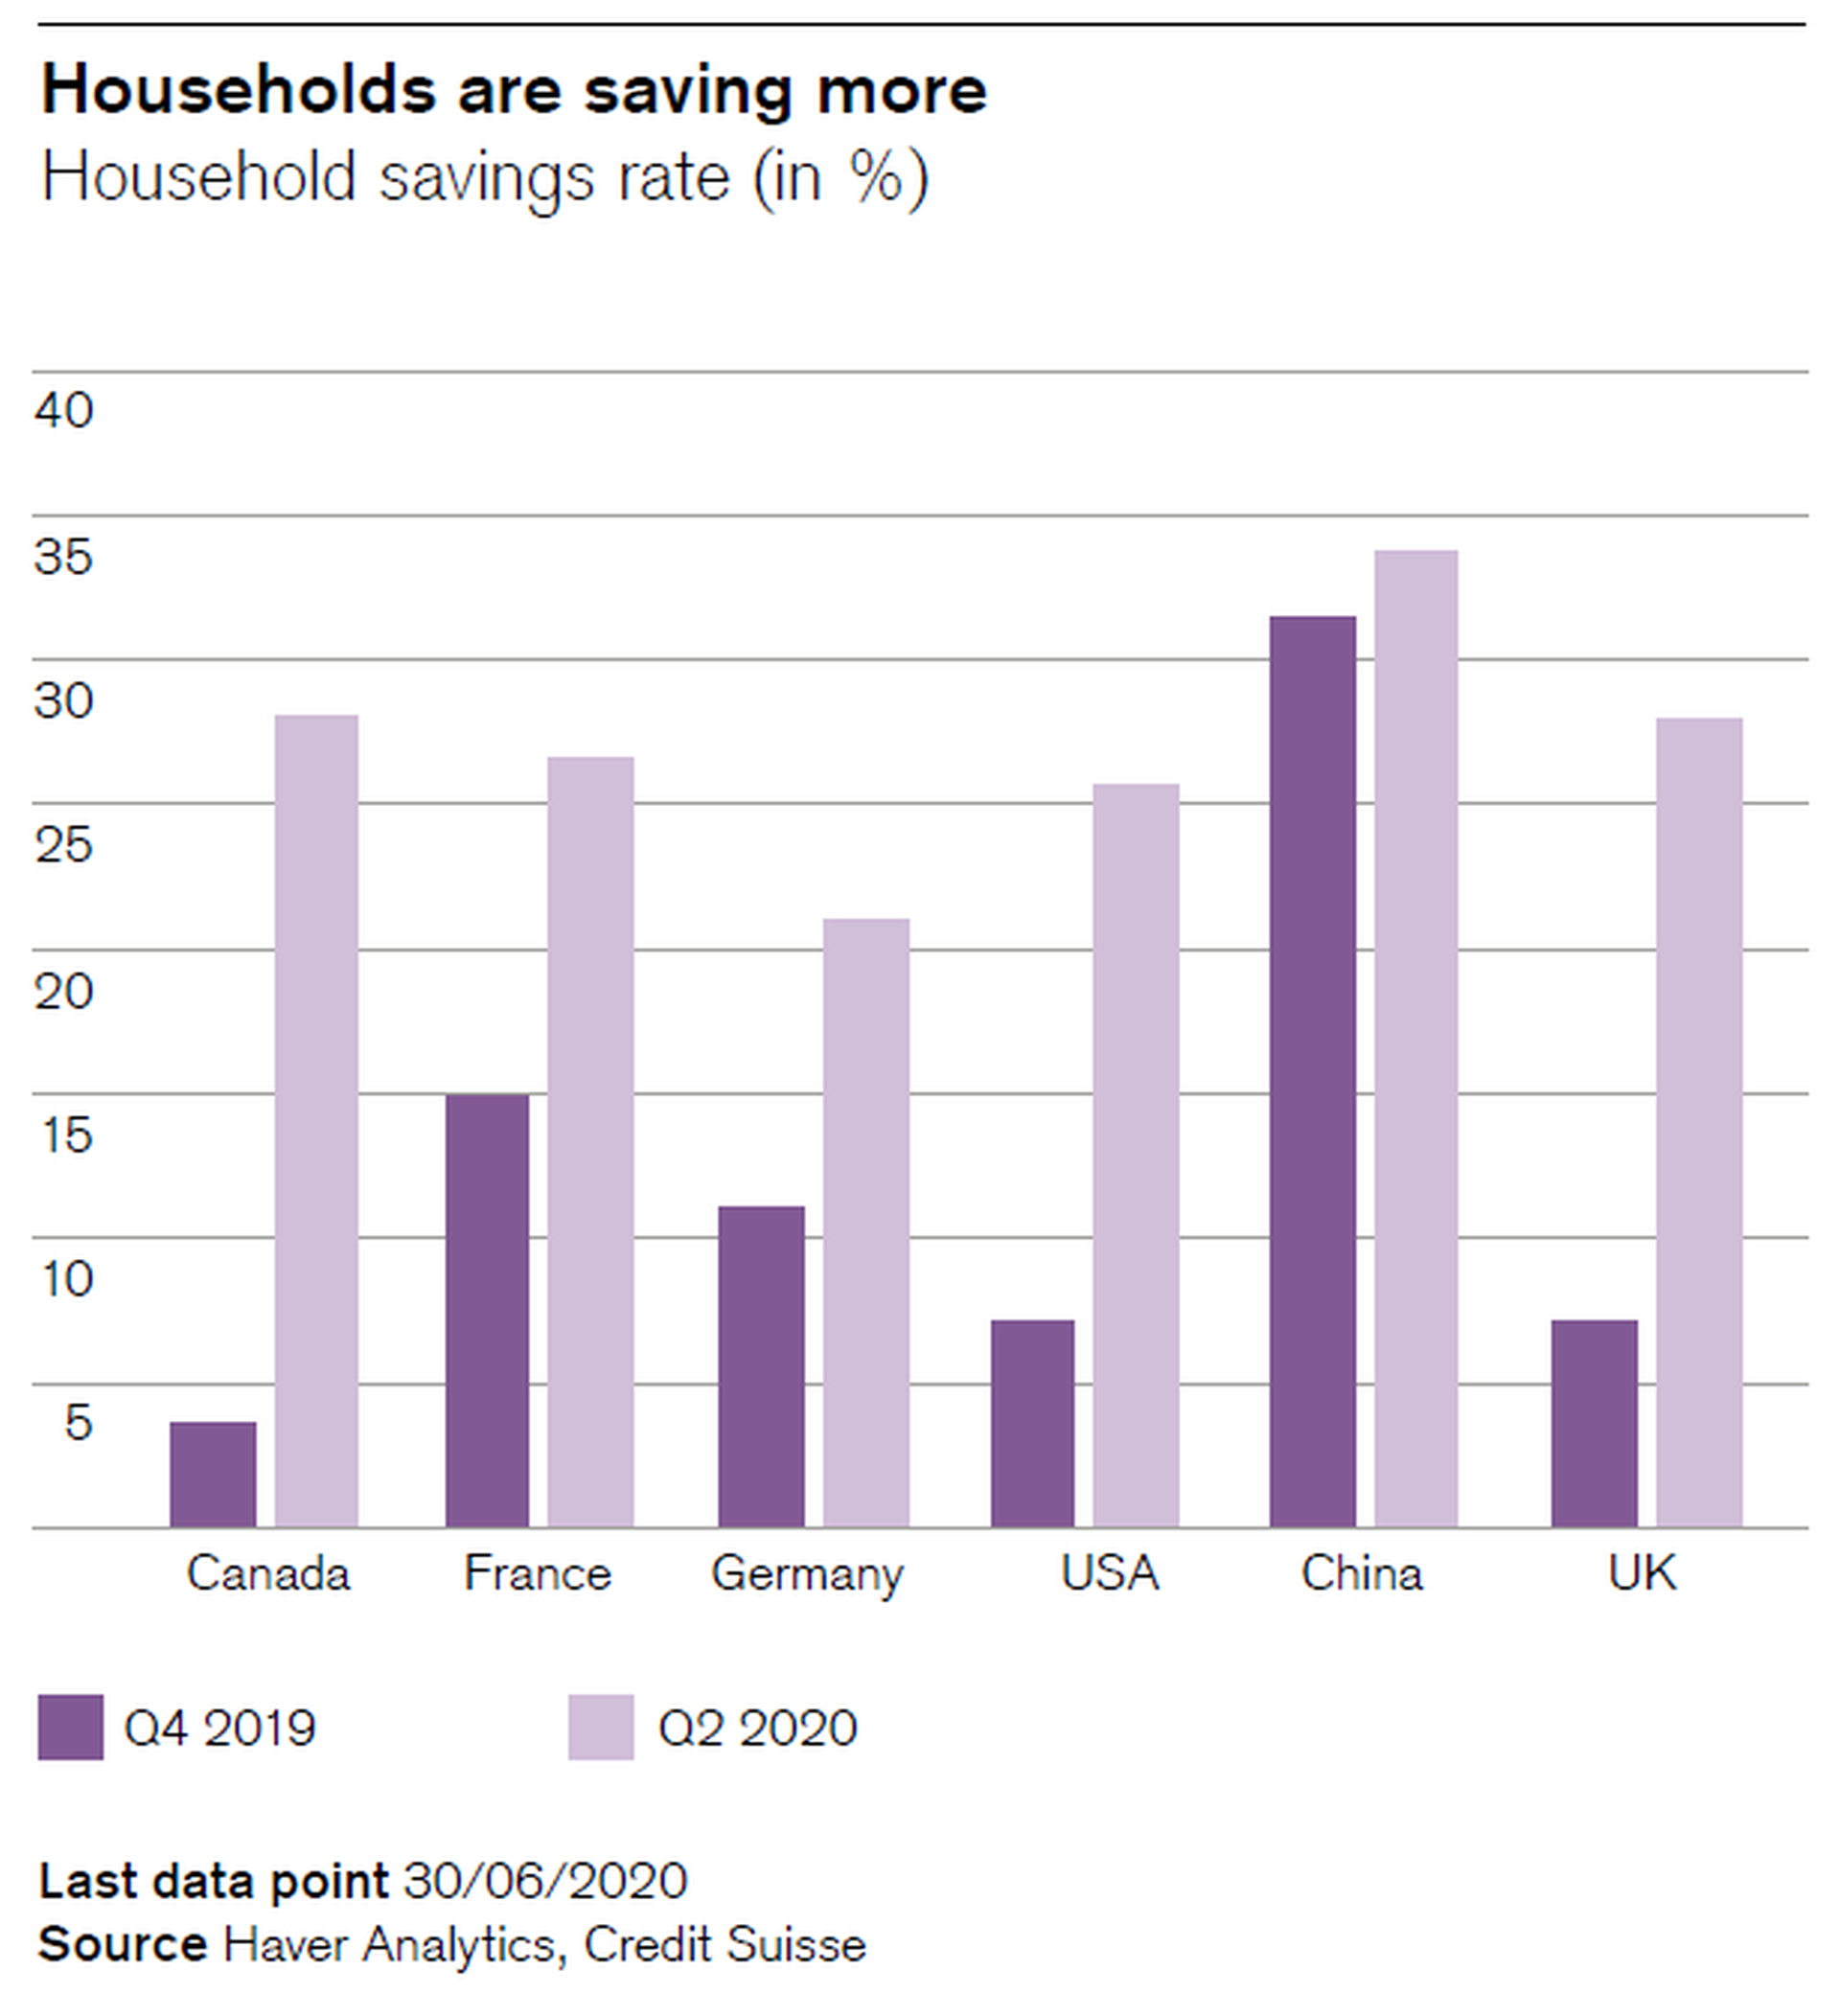 Households are saving more